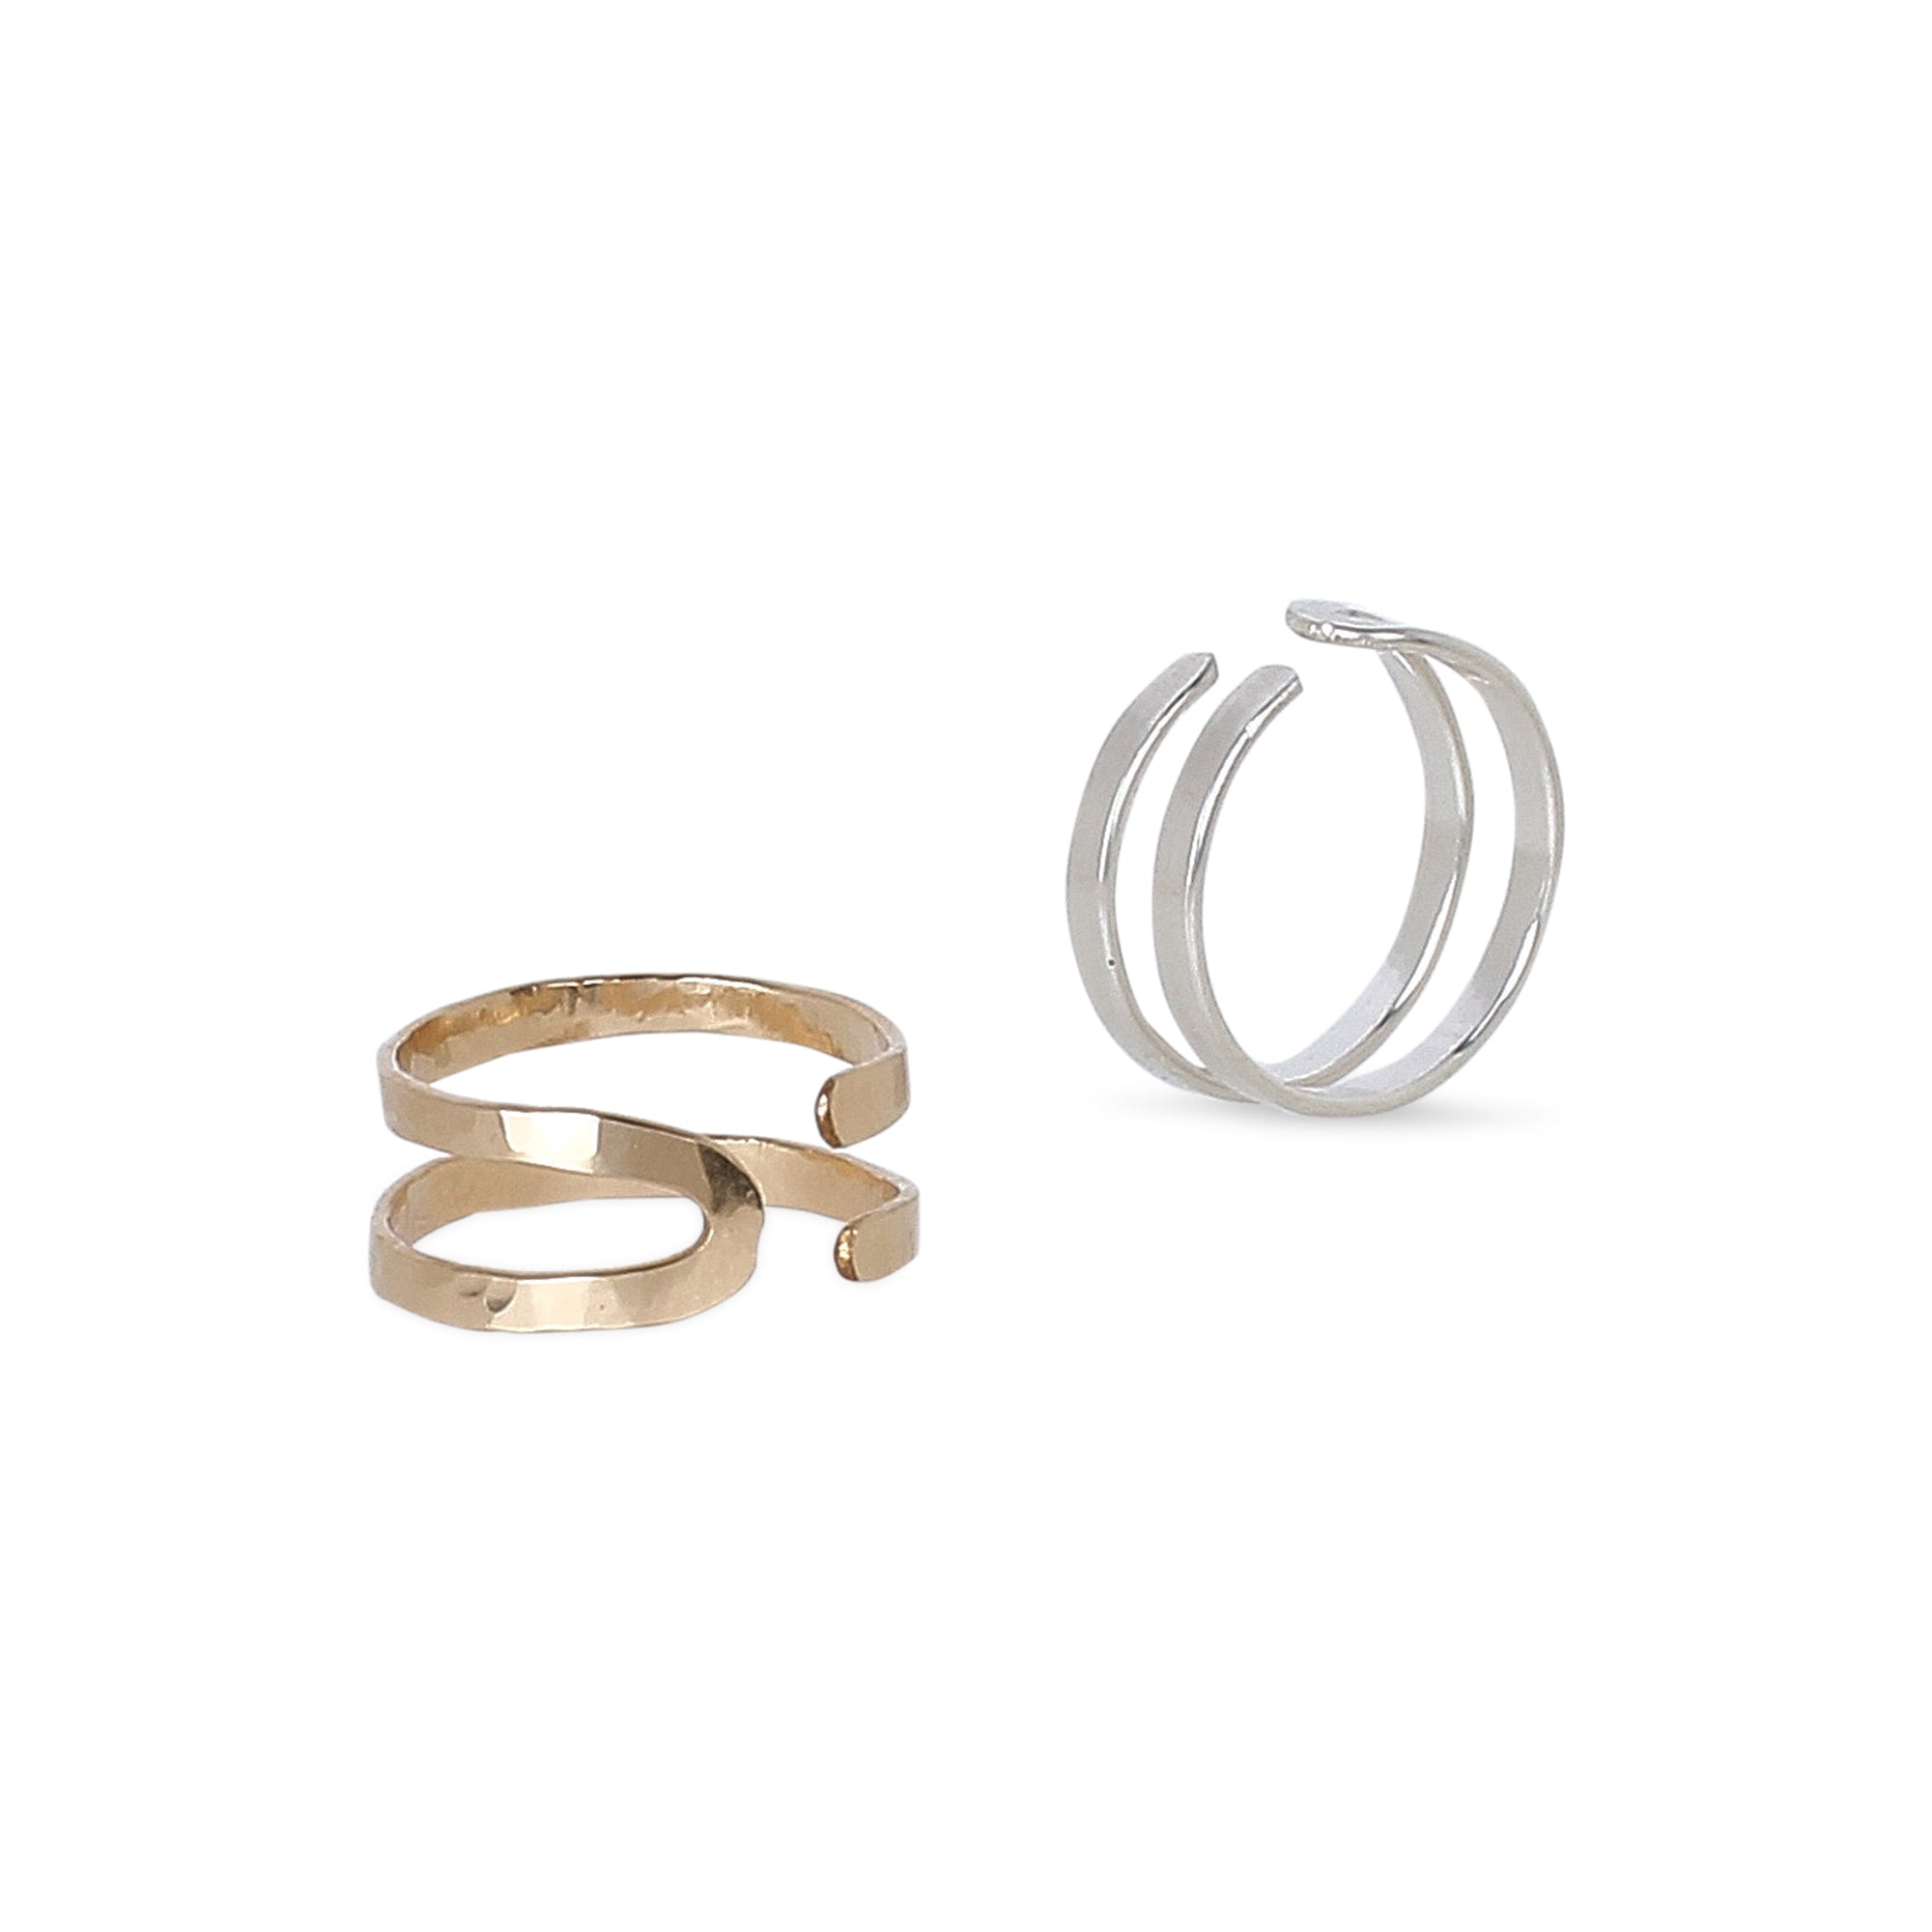 With a sleek, modern, and sculptural design, the hand-forged Joan Ring has a distinctive, minimal presence.